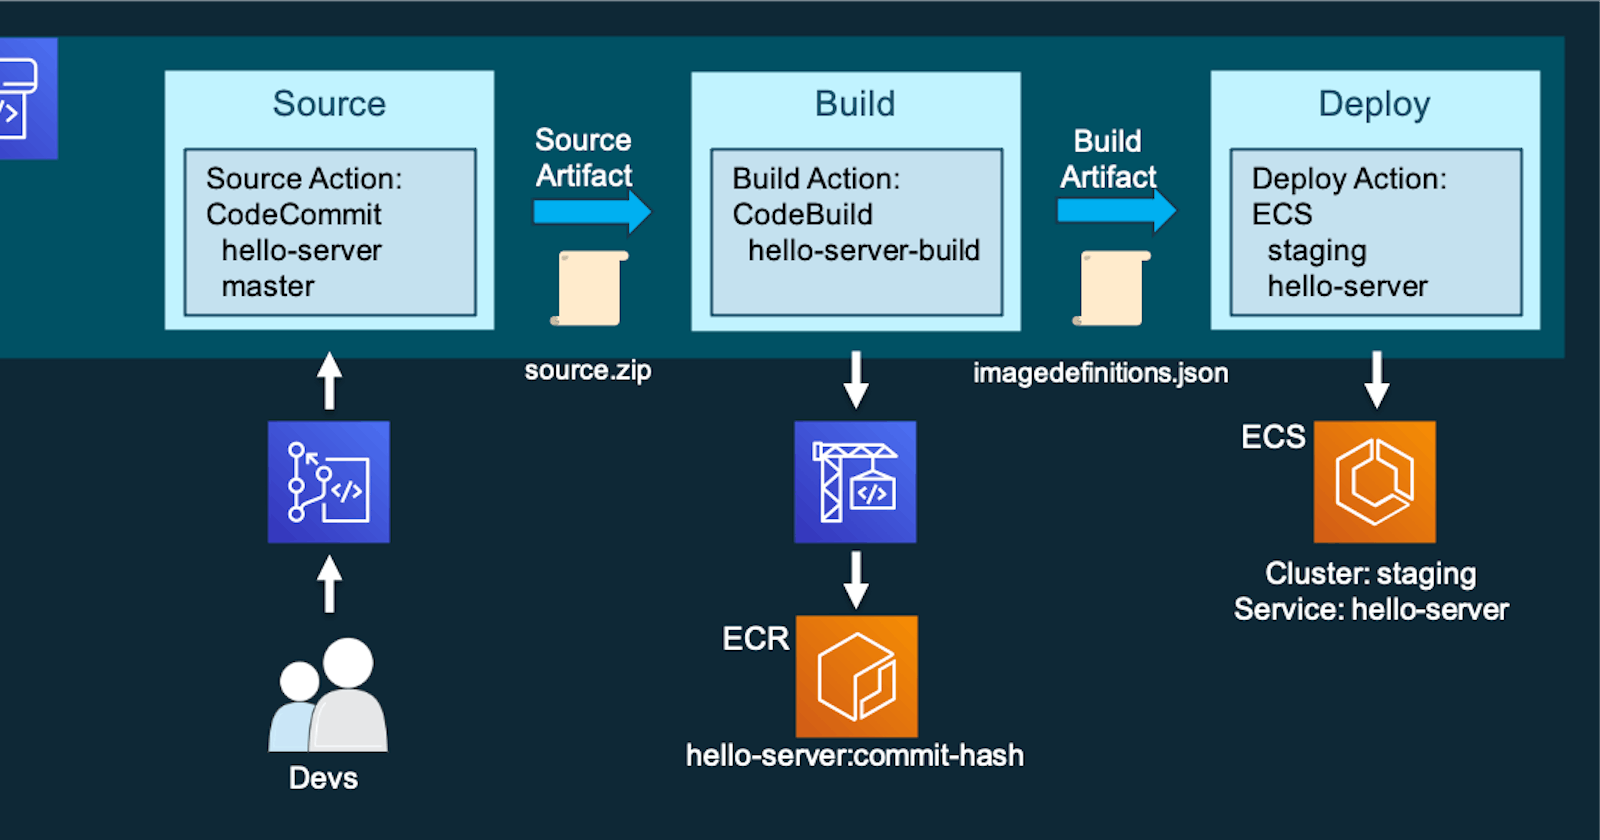 Project 6 - Day 85 Deploying an Flask application using ECS and ECR in AWS